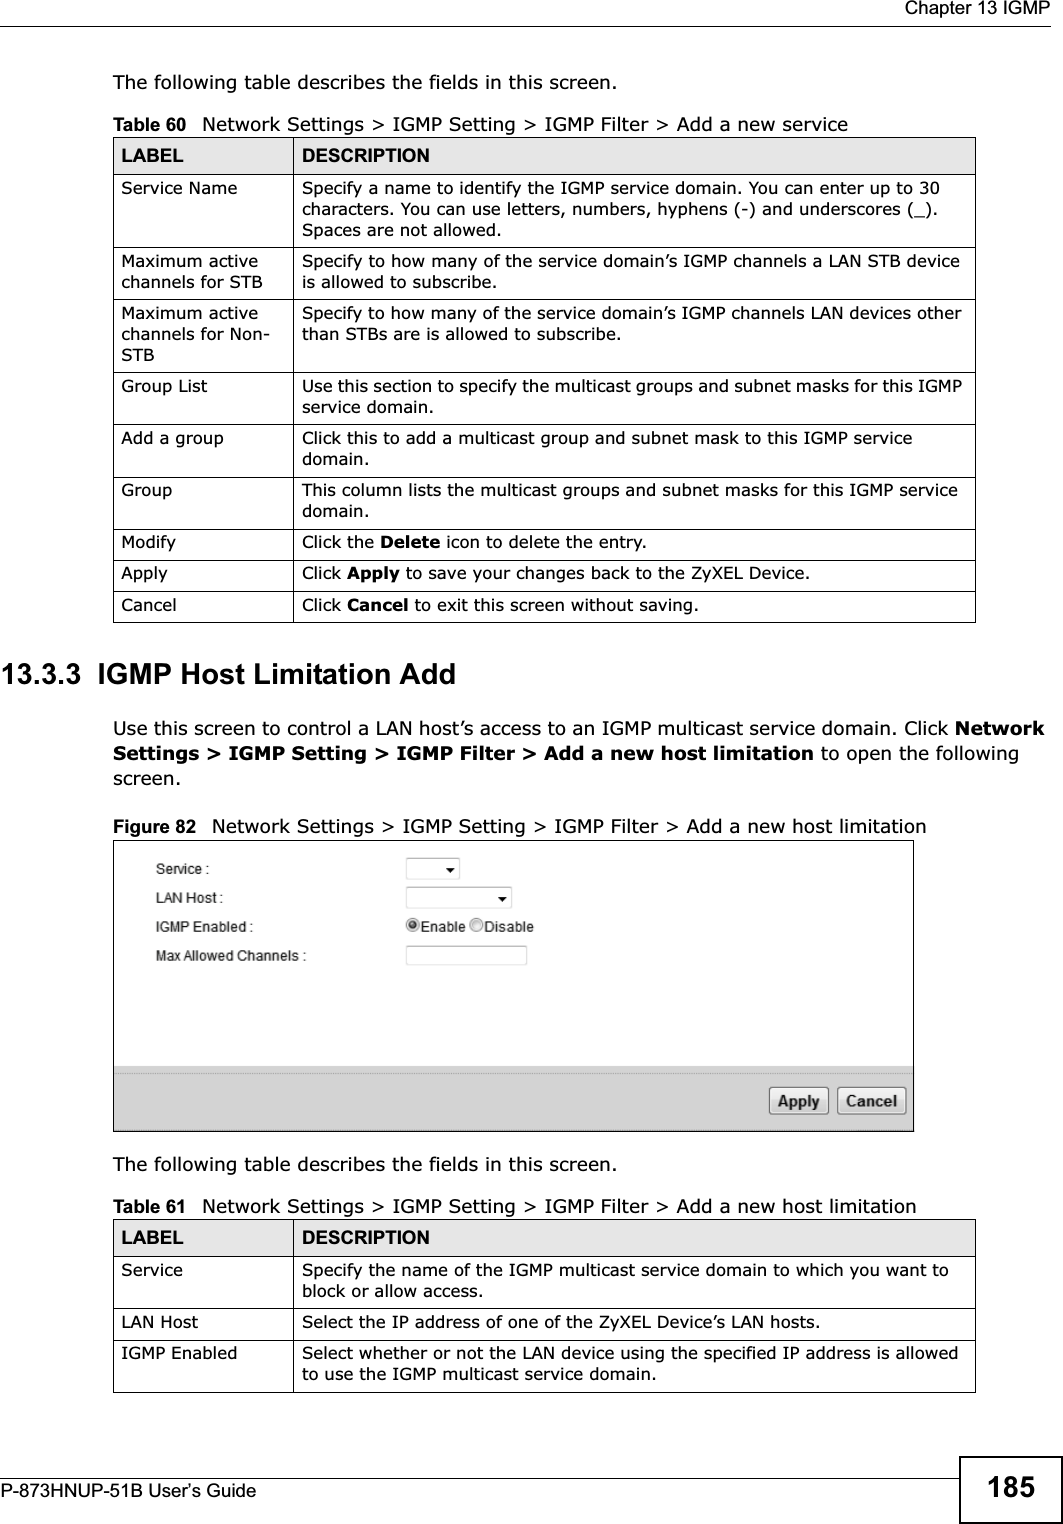  Chapter 13 IGMPP-873HNUP-51B User’s Guide 185The following table describes the fields in this screen.13.3.3  IGMP Host Limitation AddUse this screen to control a LAN host’s access to an IGMP multicast service domain. Click NetworkSettings &gt; IGMP Setting &gt; IGMP Filter &gt; Add a new host limitation to open the following screen.Figure 82   Network Settings &gt; IGMP Setting &gt; IGMP Filter &gt; Add a new host limitation The following table describes the fields in this screen.Table 60   Network Settings &gt; IGMP Setting &gt; IGMP Filter &gt; Add a new service LABEL DESCRIPTIONService Name Specify a name to identify the IGMP service domain. You can enter up to 30 characters. You can use letters, numbers, hyphens (-) and underscores (_). Spaces are not allowed.Maximum active channels for STBSpecify to how many of the service domain’s IGMP channels a LAN STB device is allowed to subscribe.Maximum active channels for Non-STBSpecify to how many of the service domain’s IGMP channels LAN devices other than STBs are is allowed to subscribe.Group List Use this section to specify the multicast groups and subnet masks for this IGMP service domain. Add a group Click this to add a multicast group and subnet mask to this IGMP service domain. Group This column lists the multicast groups and subnet masks for this IGMP service domain. Modify Click the Delete icon to delete the entry.Apply Click Apply to save your changes back to the ZyXEL Device.Cancel Click Cancel to exit this screen without saving.Table 61   Network Settings &gt; IGMP Setting &gt; IGMP Filter &gt; Add a new host limitationLABEL DESCRIPTIONService Specify the name of the IGMP multicast service domain to which you want to block or allow access.LAN Host Select the IP address of one of the ZyXEL Device’s LAN hosts.IGMP Enabled Select whether or not the LAN device using the specified IP address is allowed to use the IGMP multicast service domain.